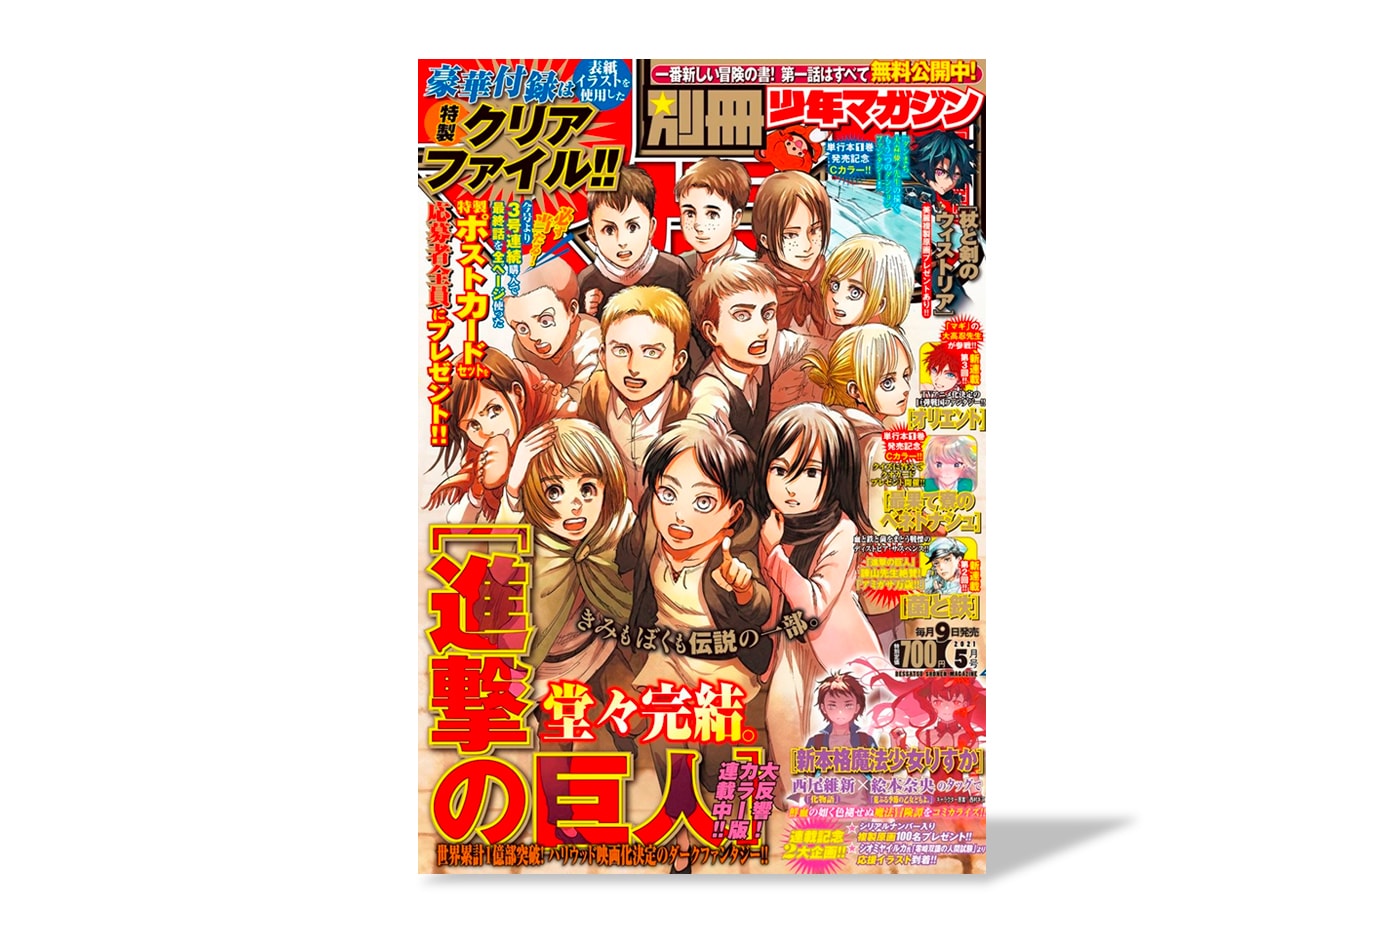 Attack on Titan Final Chapter Weekly Shōnen Magazine Sold Out Forcing 2nd Printing Info